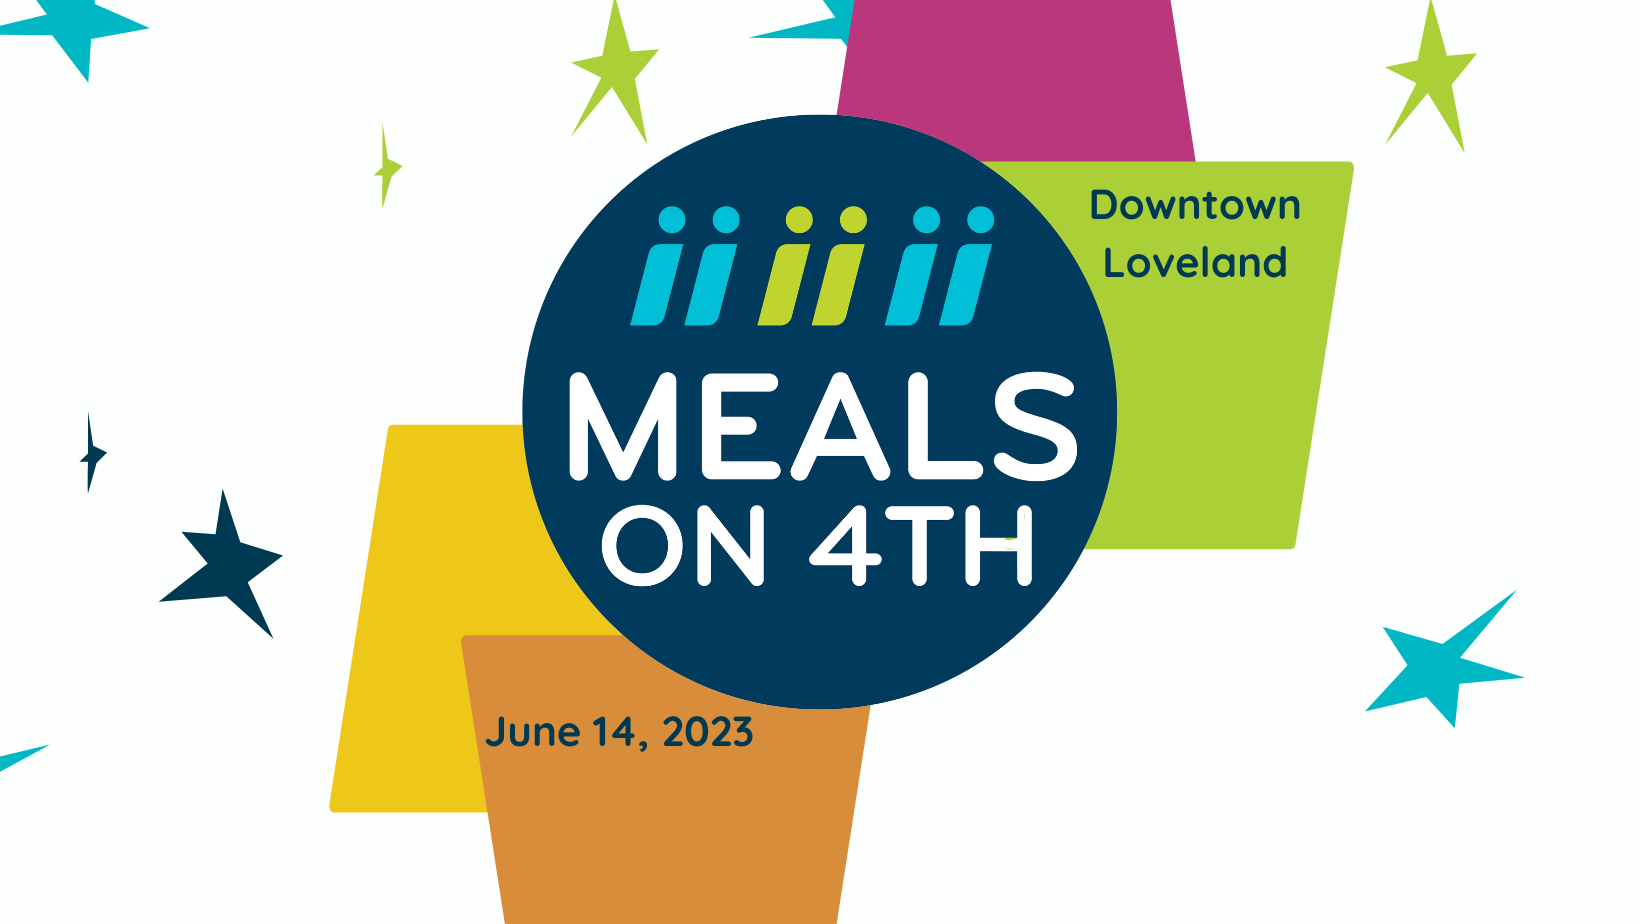 Meals on 4th